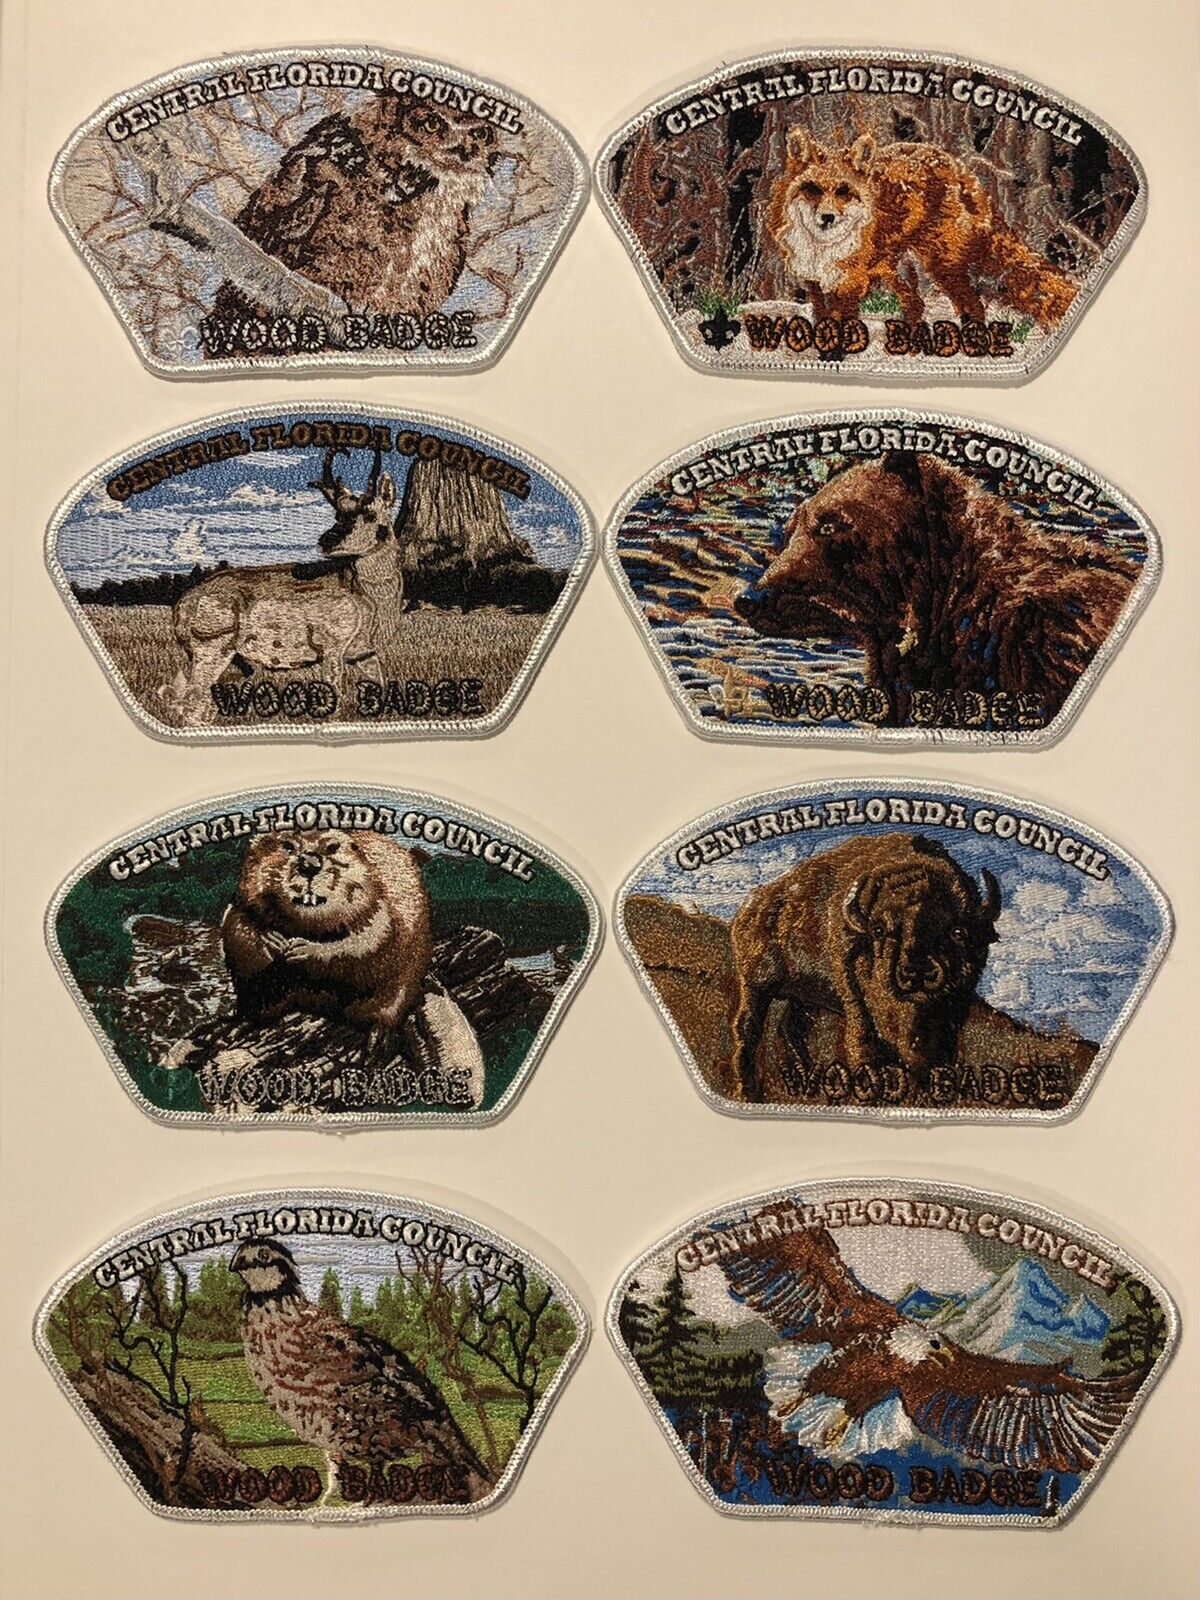 BSA CENTRAL FLORIDA COUNCIL WOOD BADGE COMPLETE SET-LOT OF 8 WHITE BORDER CSP\'S